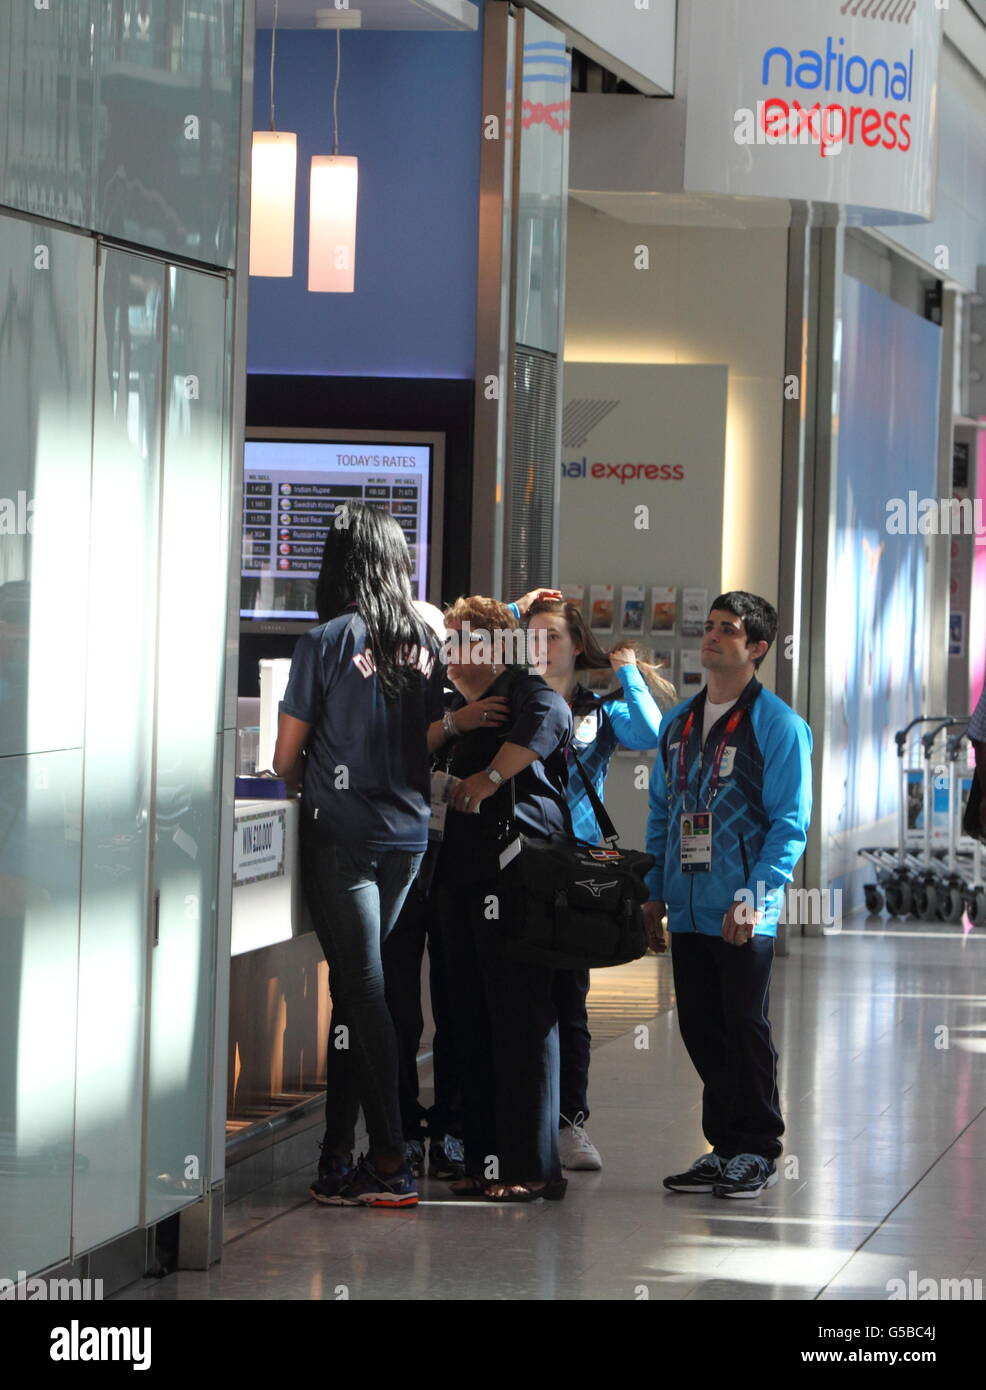 Members of the Dominican Republic Olympic team queue at the Travelex Currency Exchange arrives at Heathrow Airport, London. Stock Photo